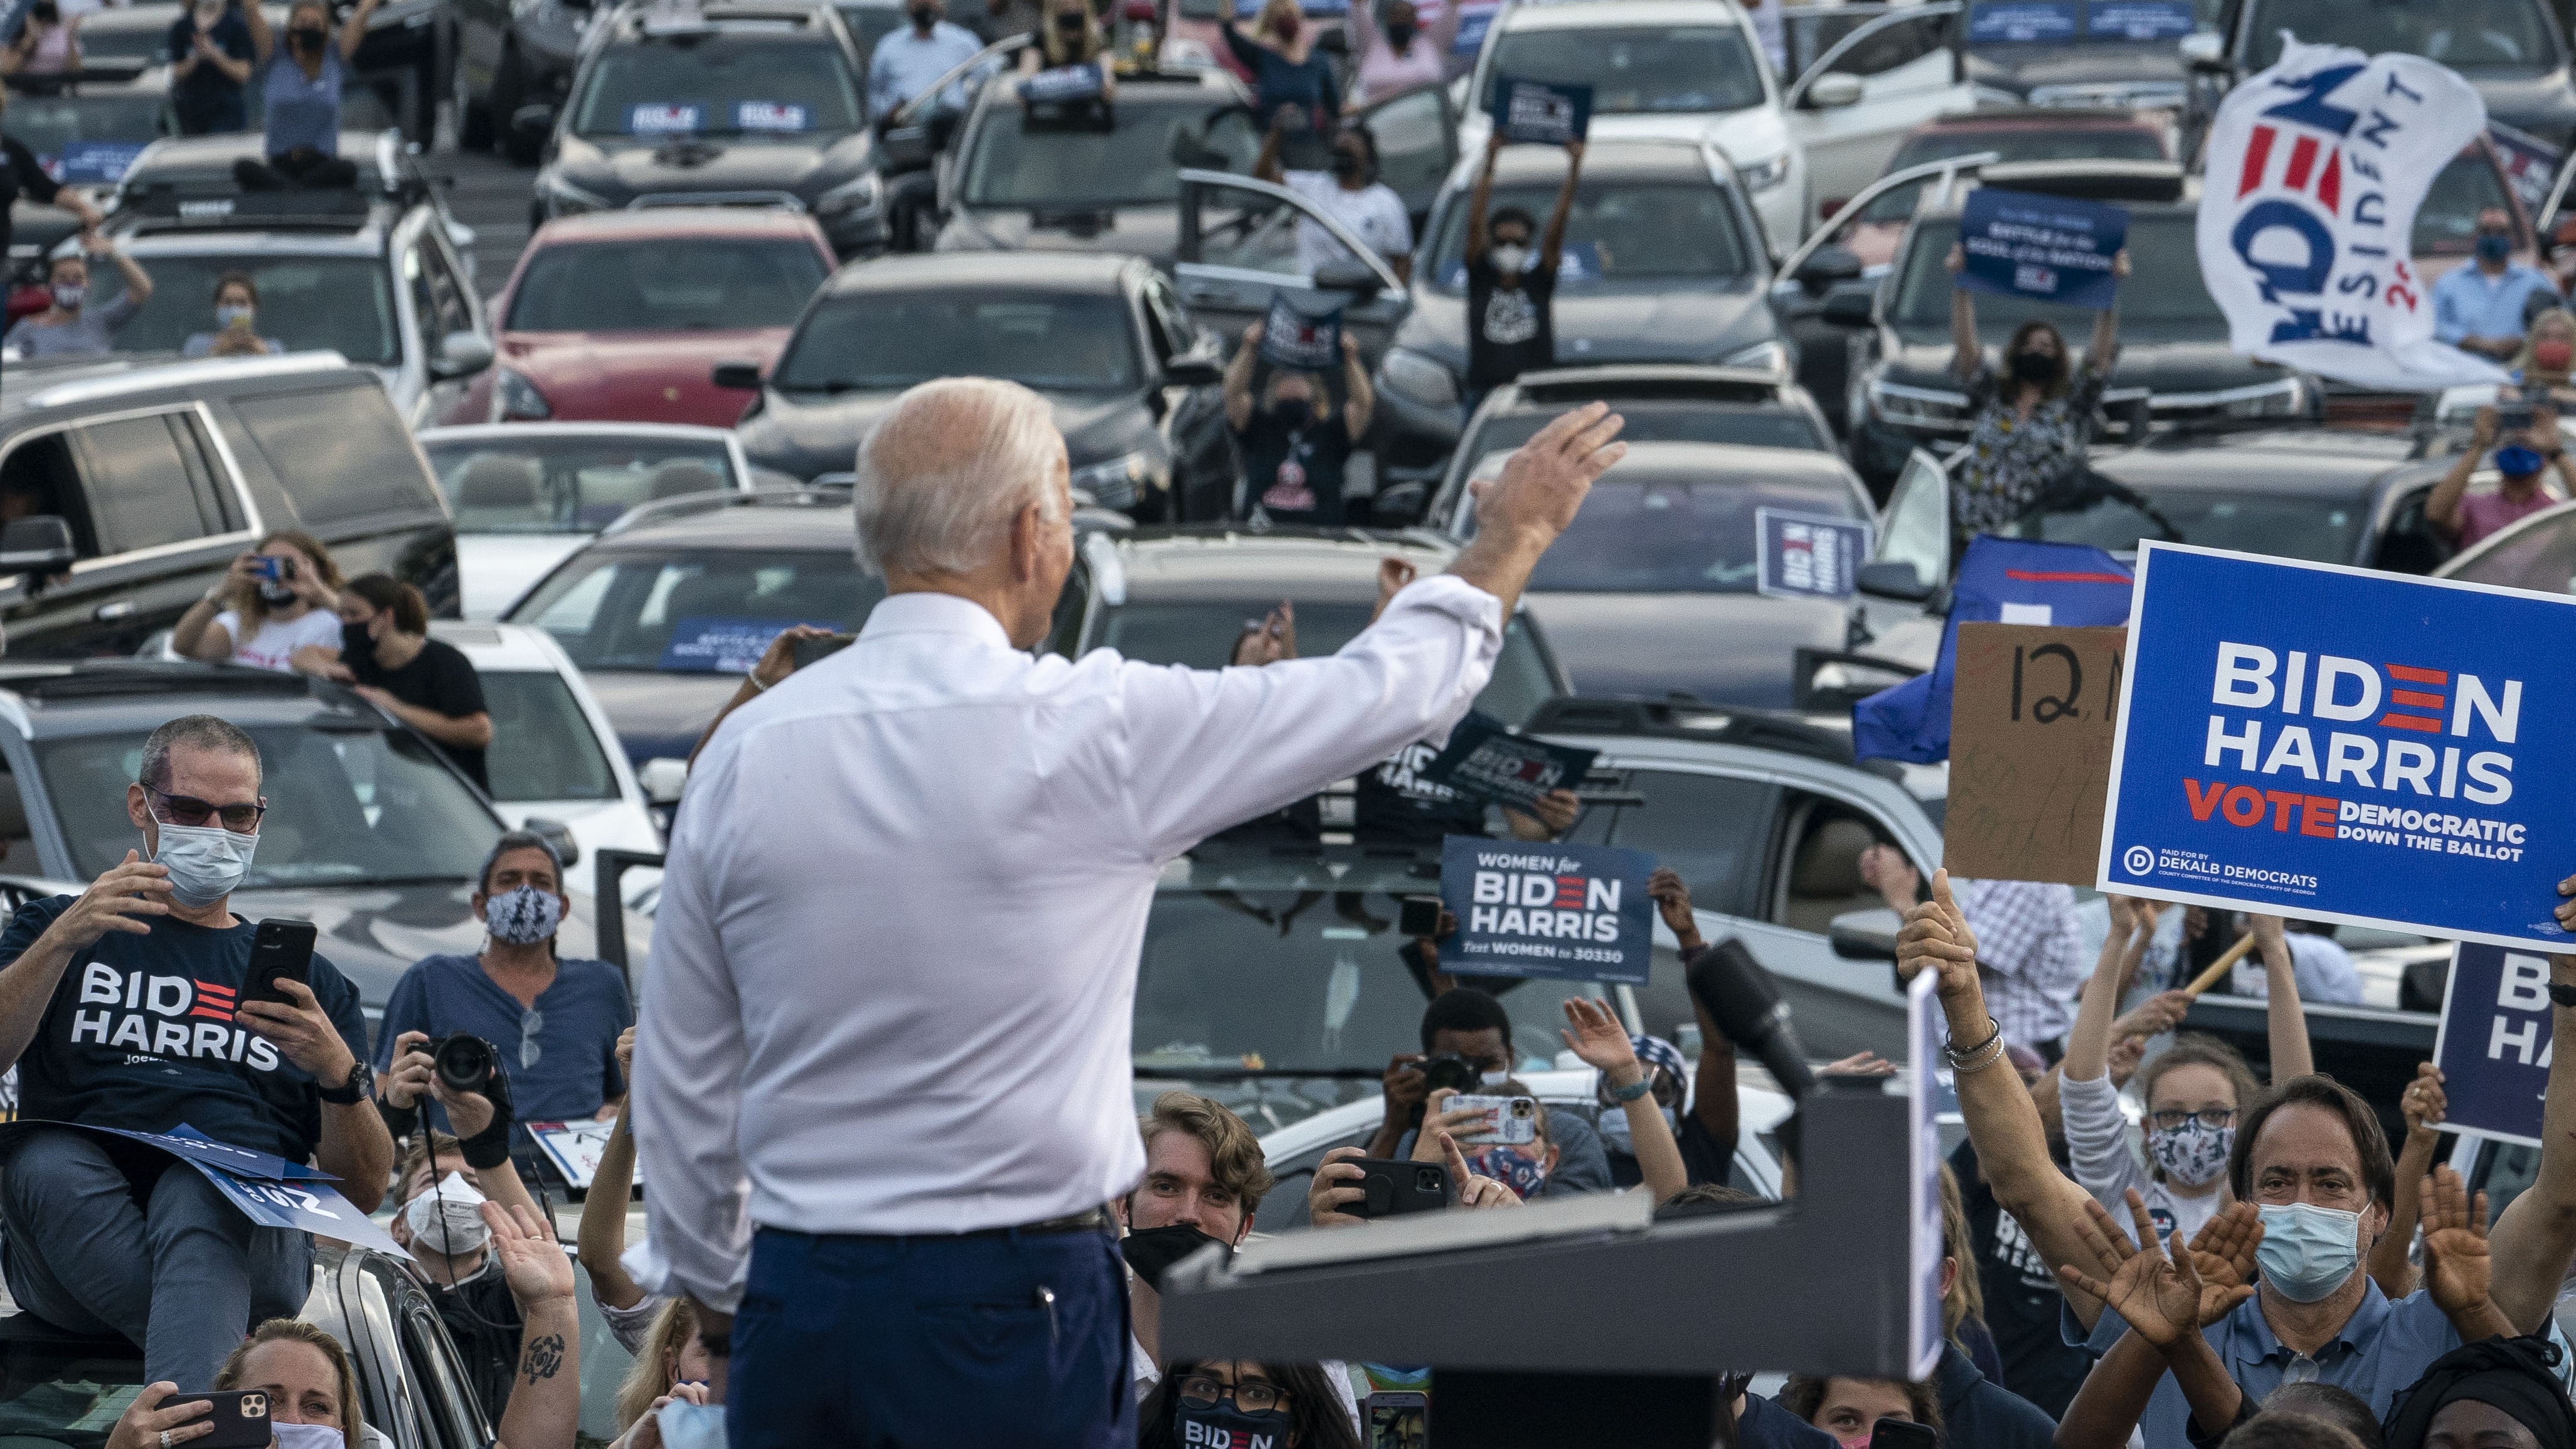 Joe Biden waves to supporters in Georgia during the 2020 presidential election campaign.